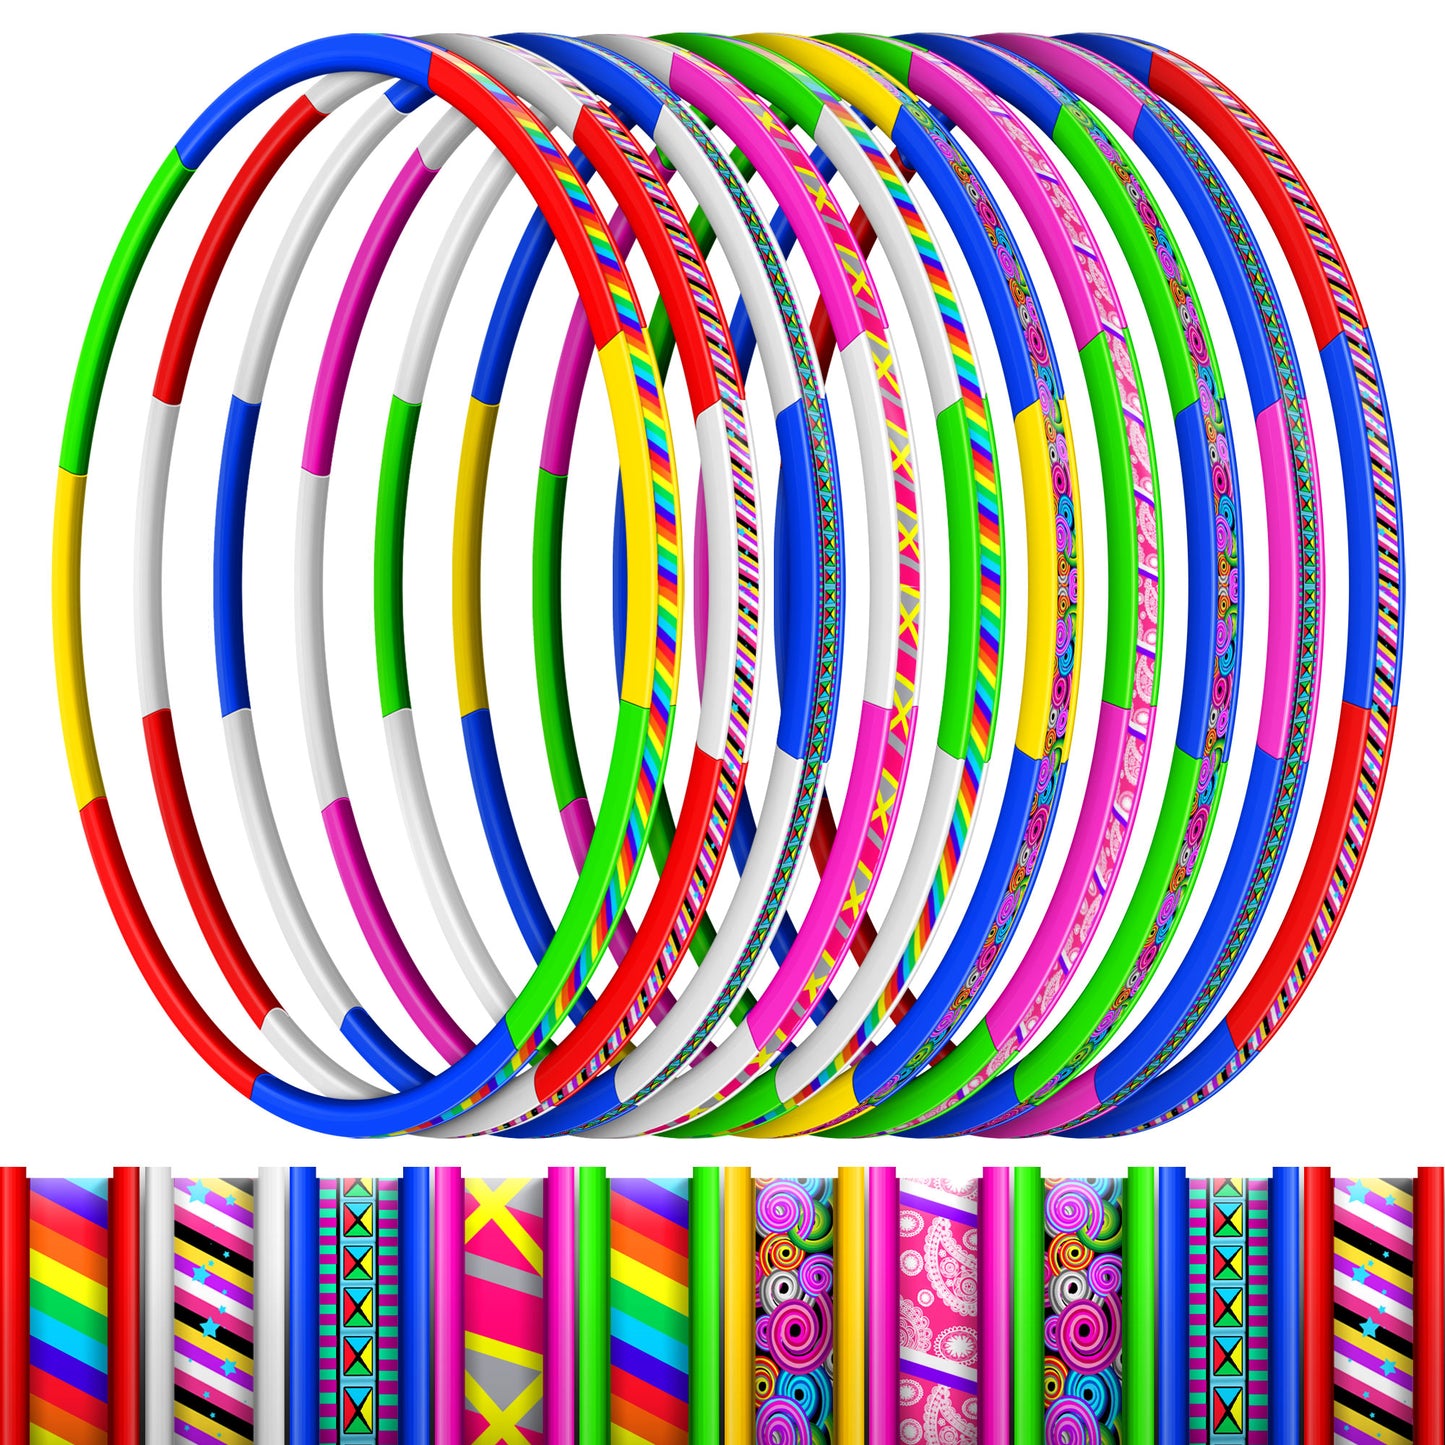 "Kids Exercise Toy Hoop Bundle Pack-Adjustable Weight Size Plastic Hoops Rings Toys, Fashional Fitness Hoop with Sticker for Kids Boys Girls Rolling Race,Exercise,Training, Playing,32 Inch "